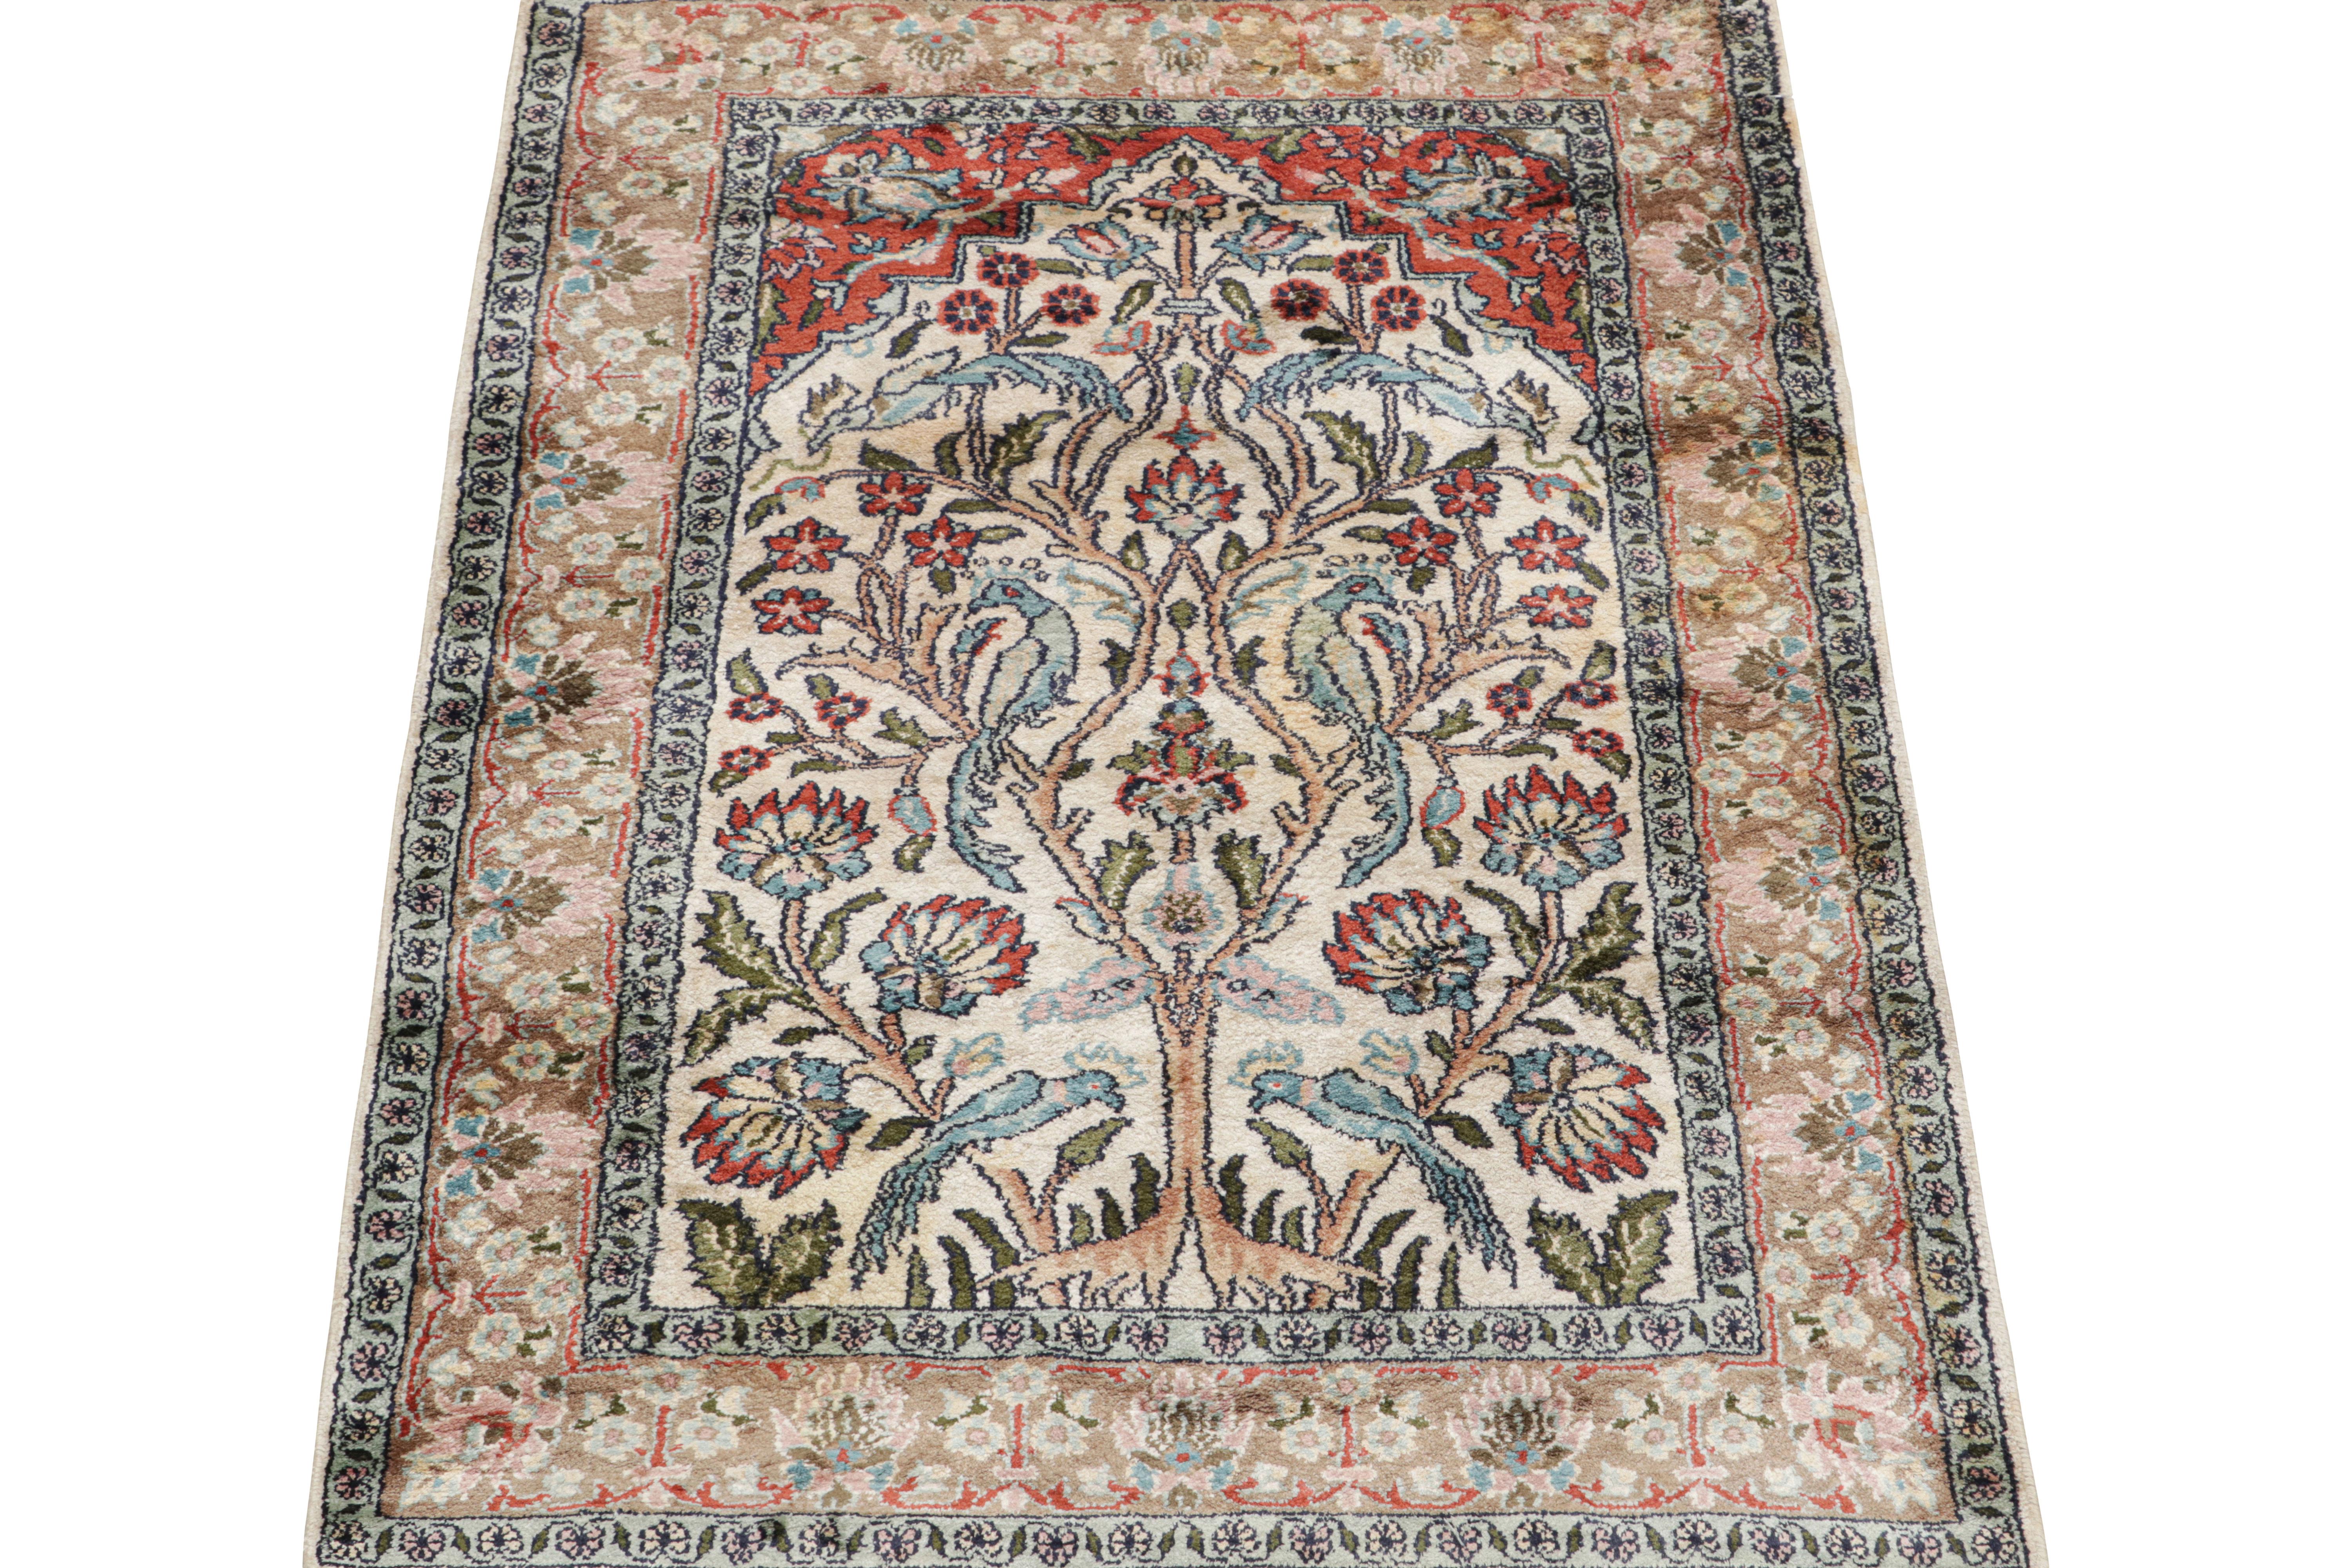 Modern Rug & Kilim’s Persian style Rug in Beige with Floral Pictorial Patterns